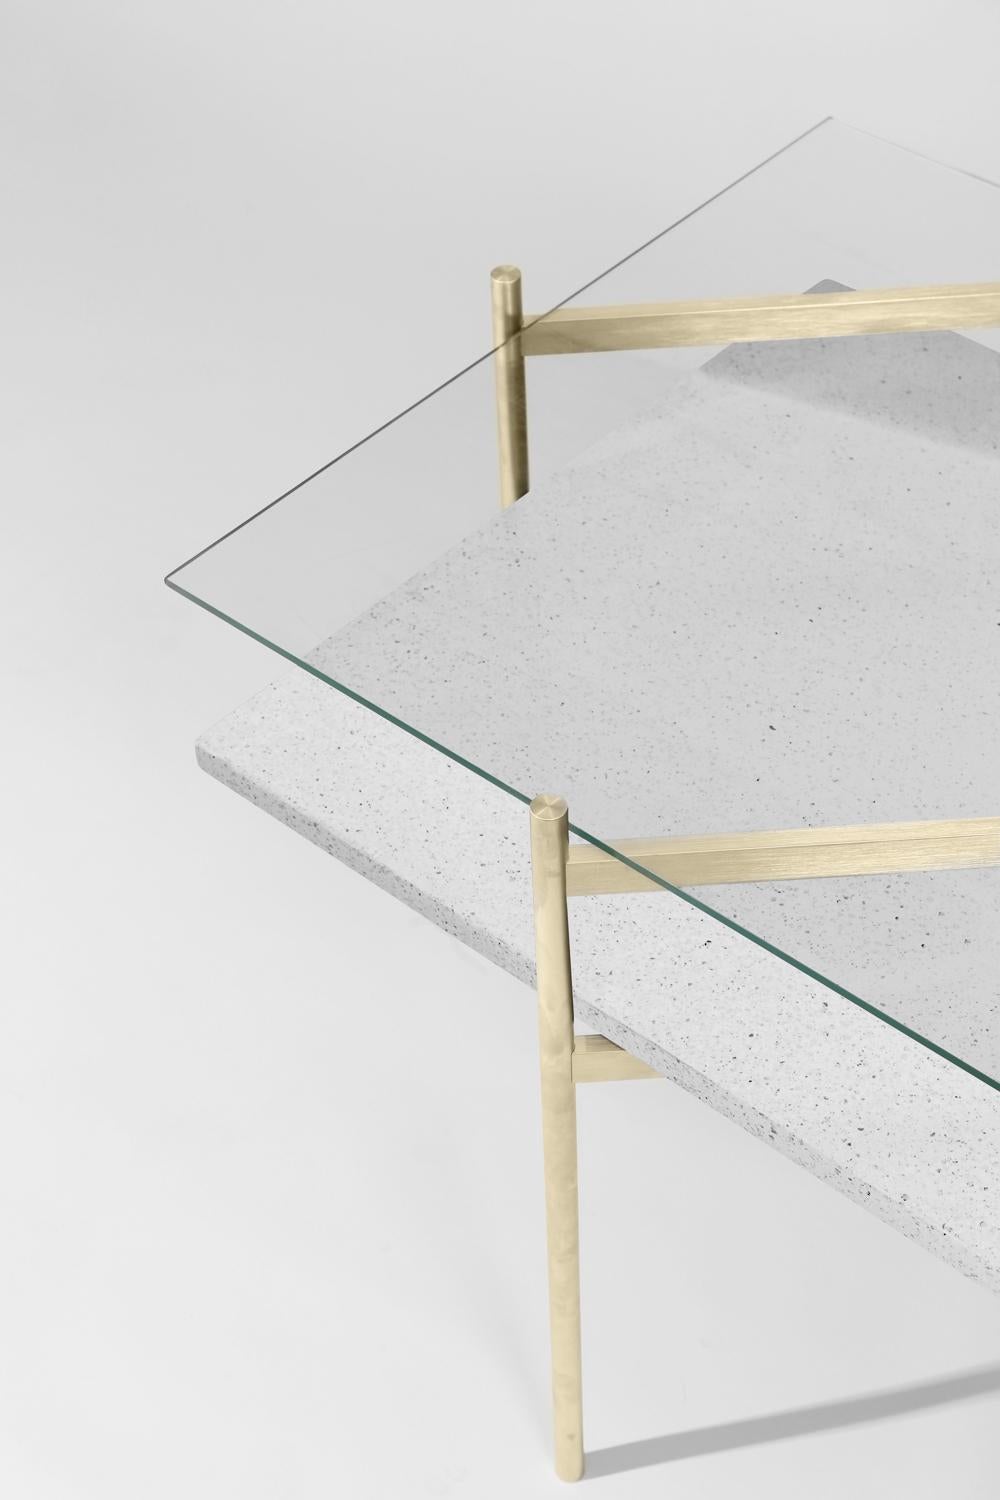 Made to order. Please allow six weeks for production.

Brass Frame / Clear Glass / White Mosaic

The Duotone Furniture series is based on a modular hardware system that pairs sturdy construction with visual lightness and a range of potential